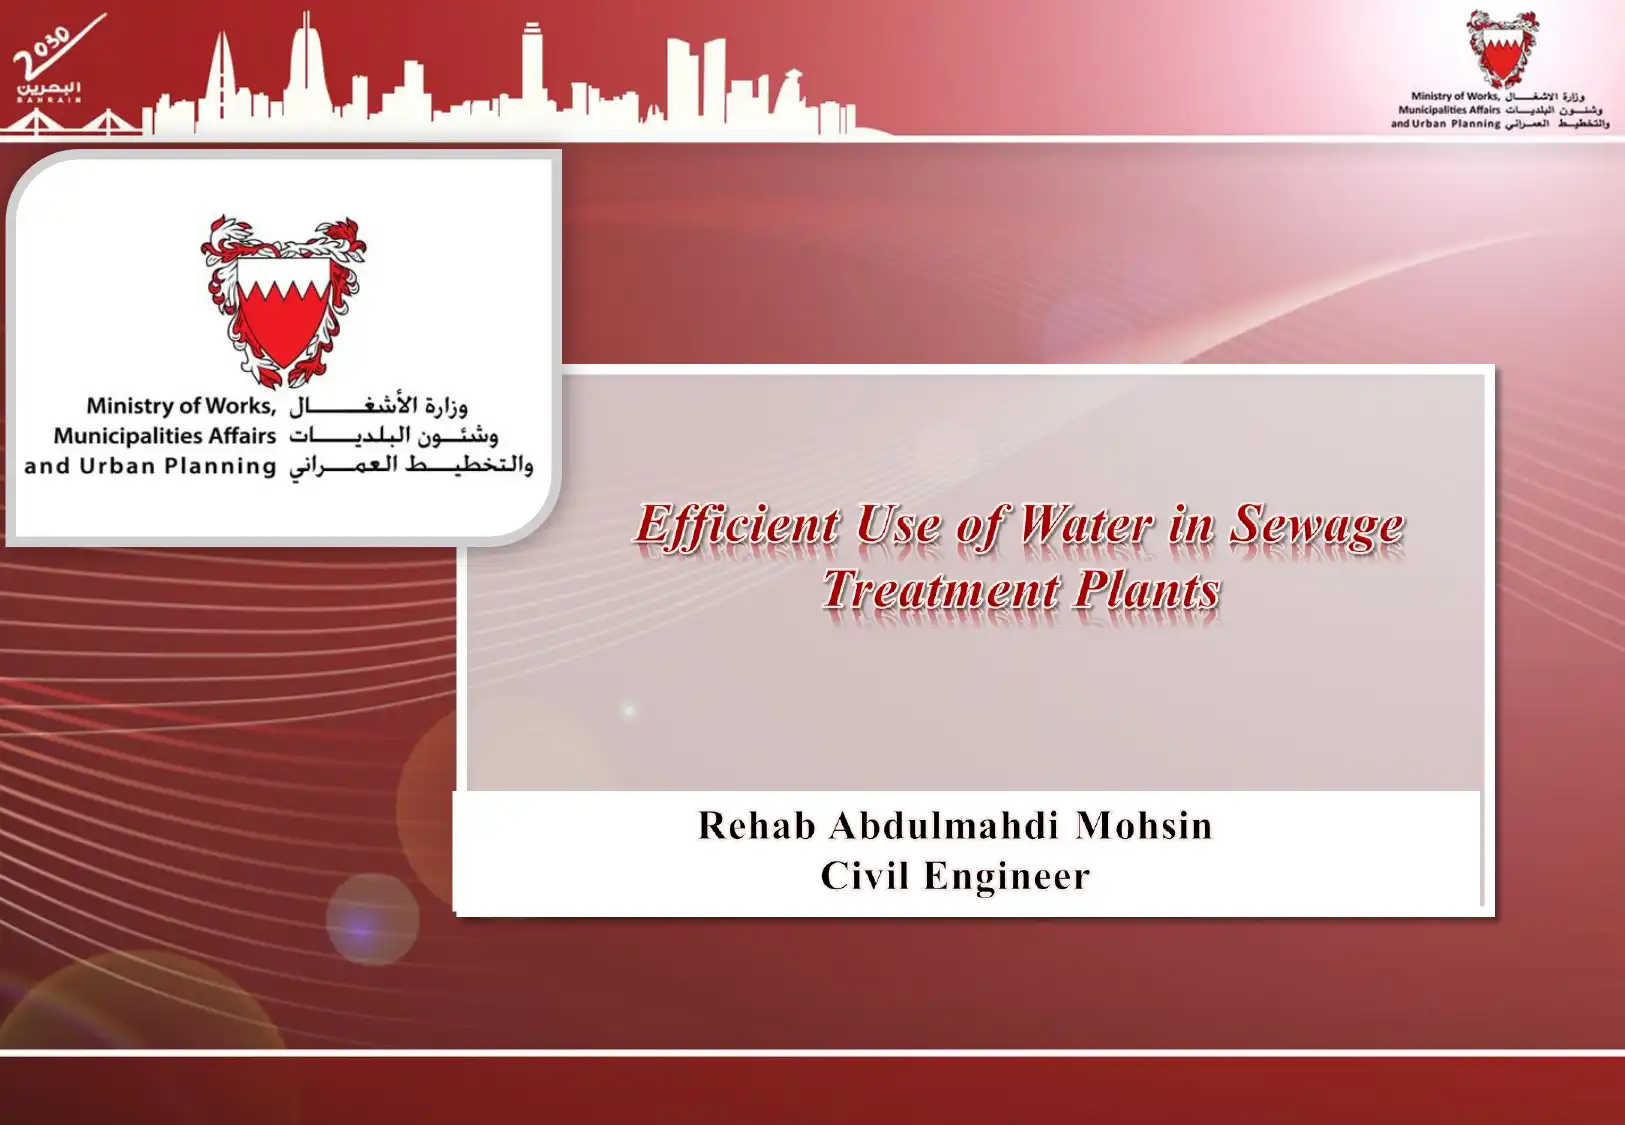 Efficient Use of Water in Sewage Treatment Plants